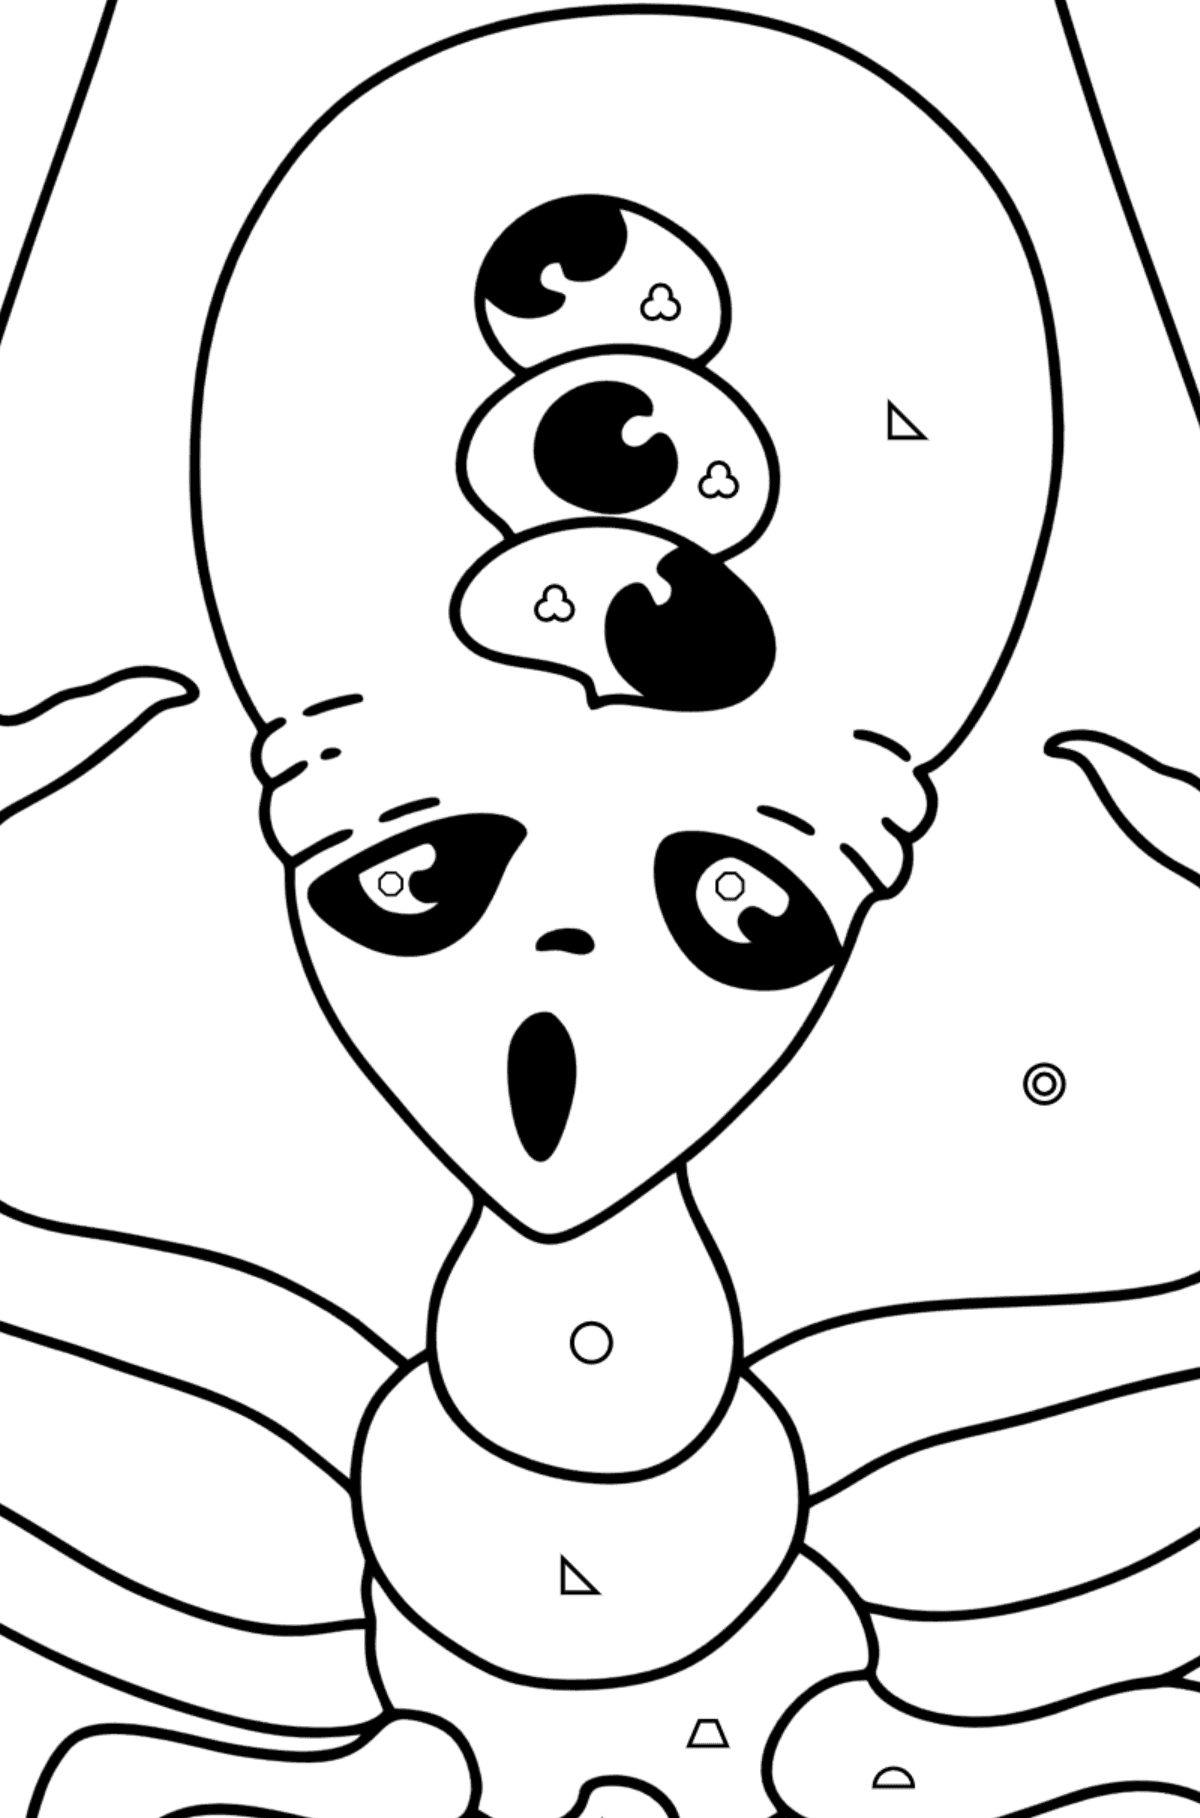 Scary Alien Coloring page - Coloring by Geometric Shapes for Kids